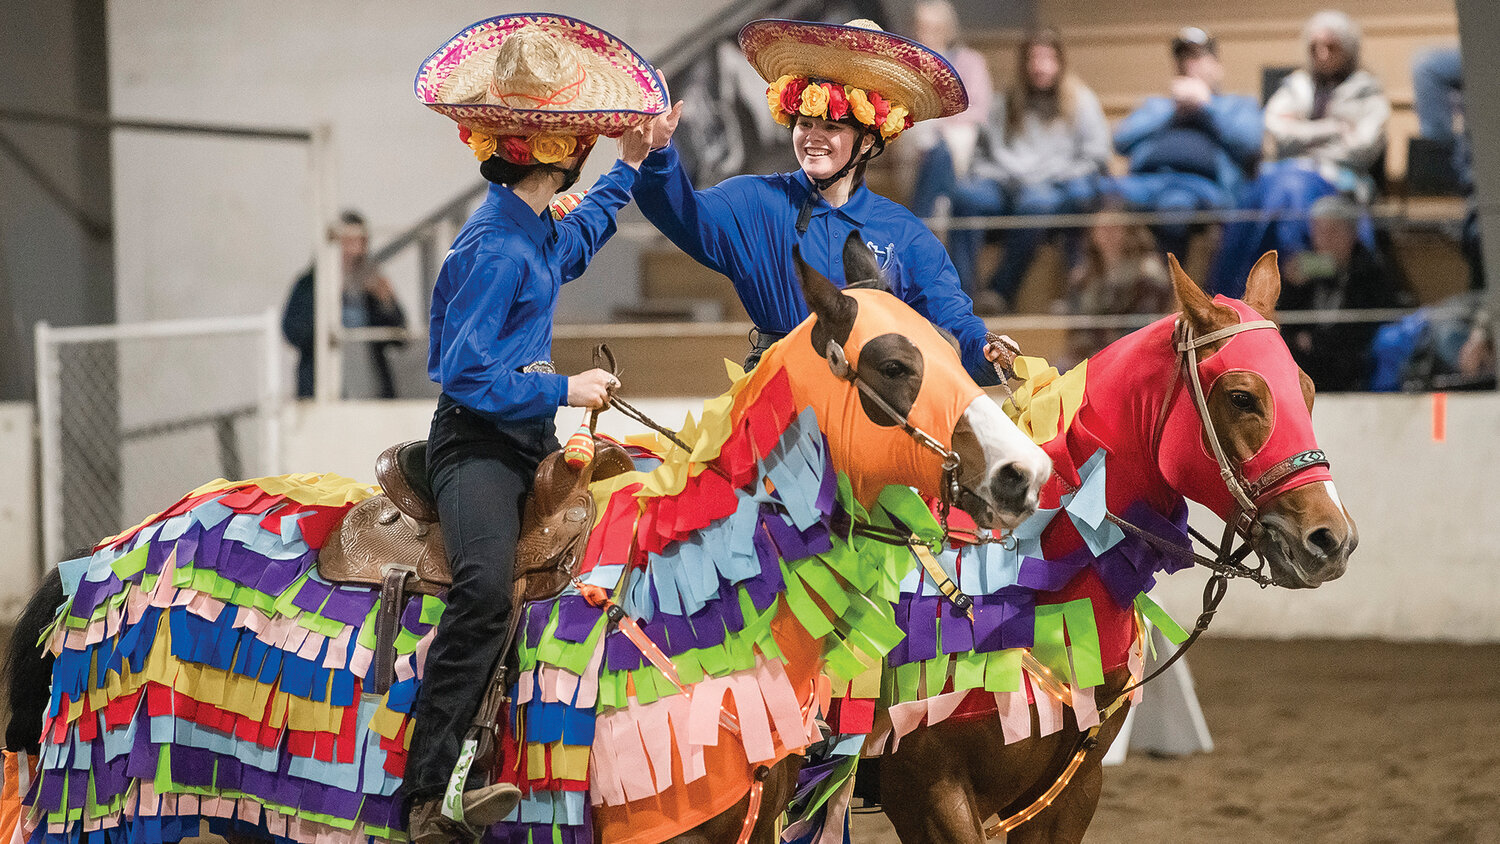 Hockinson riders Allison Domingos, left, and Jewel Atchley high-five after finishing a performance to “La Bamba” in Tacoma on Saturday, April 15 for the team’s final district meet of the season.